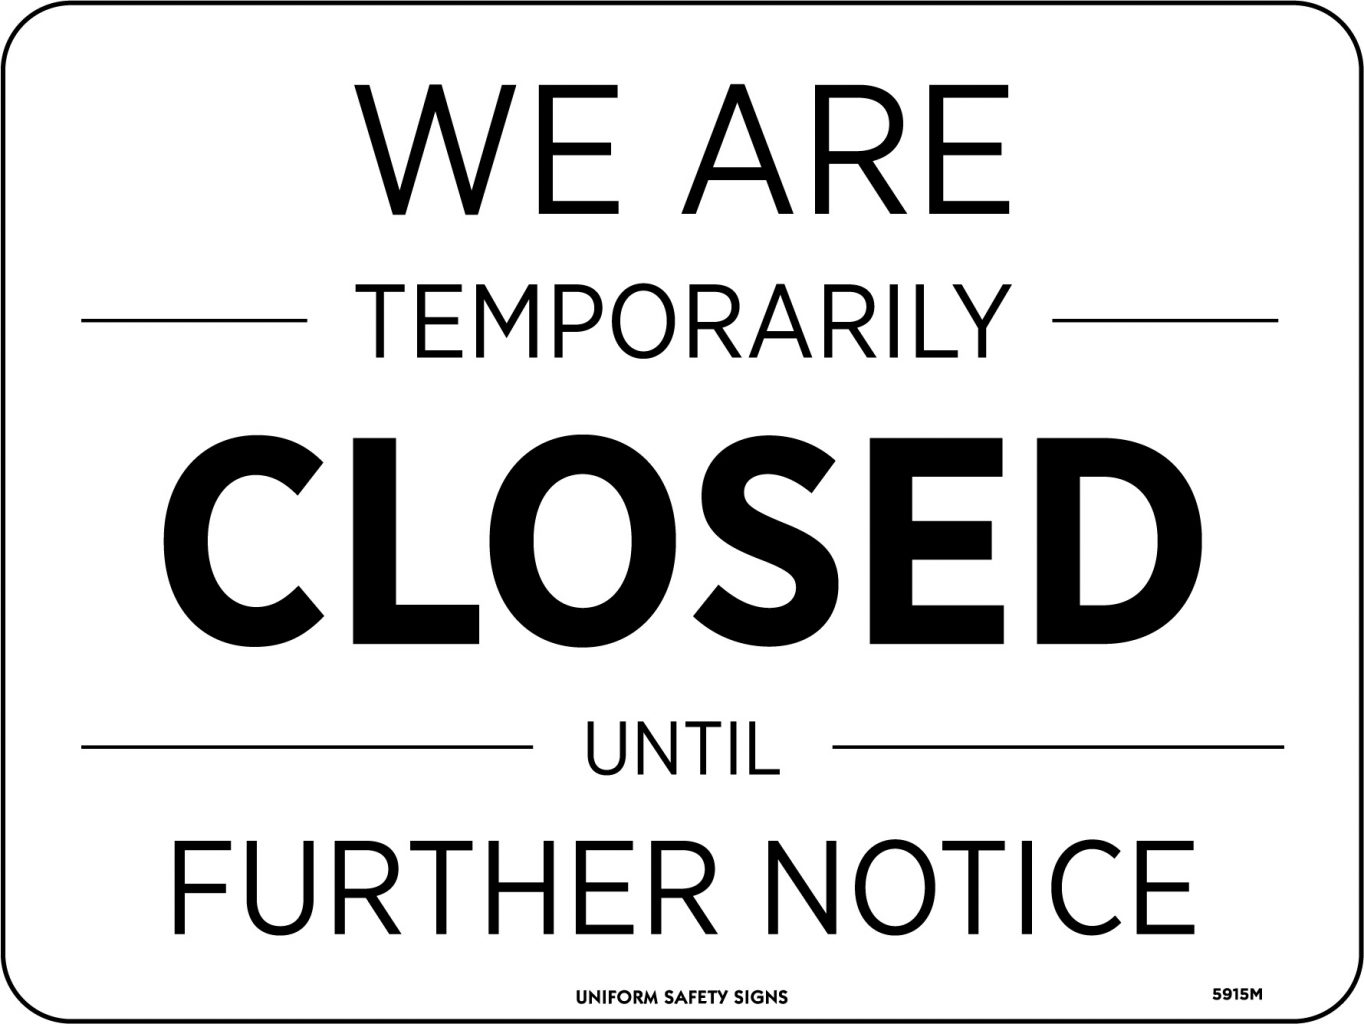 Until further Notice. Signs and Notices. Further a sign. Closed until